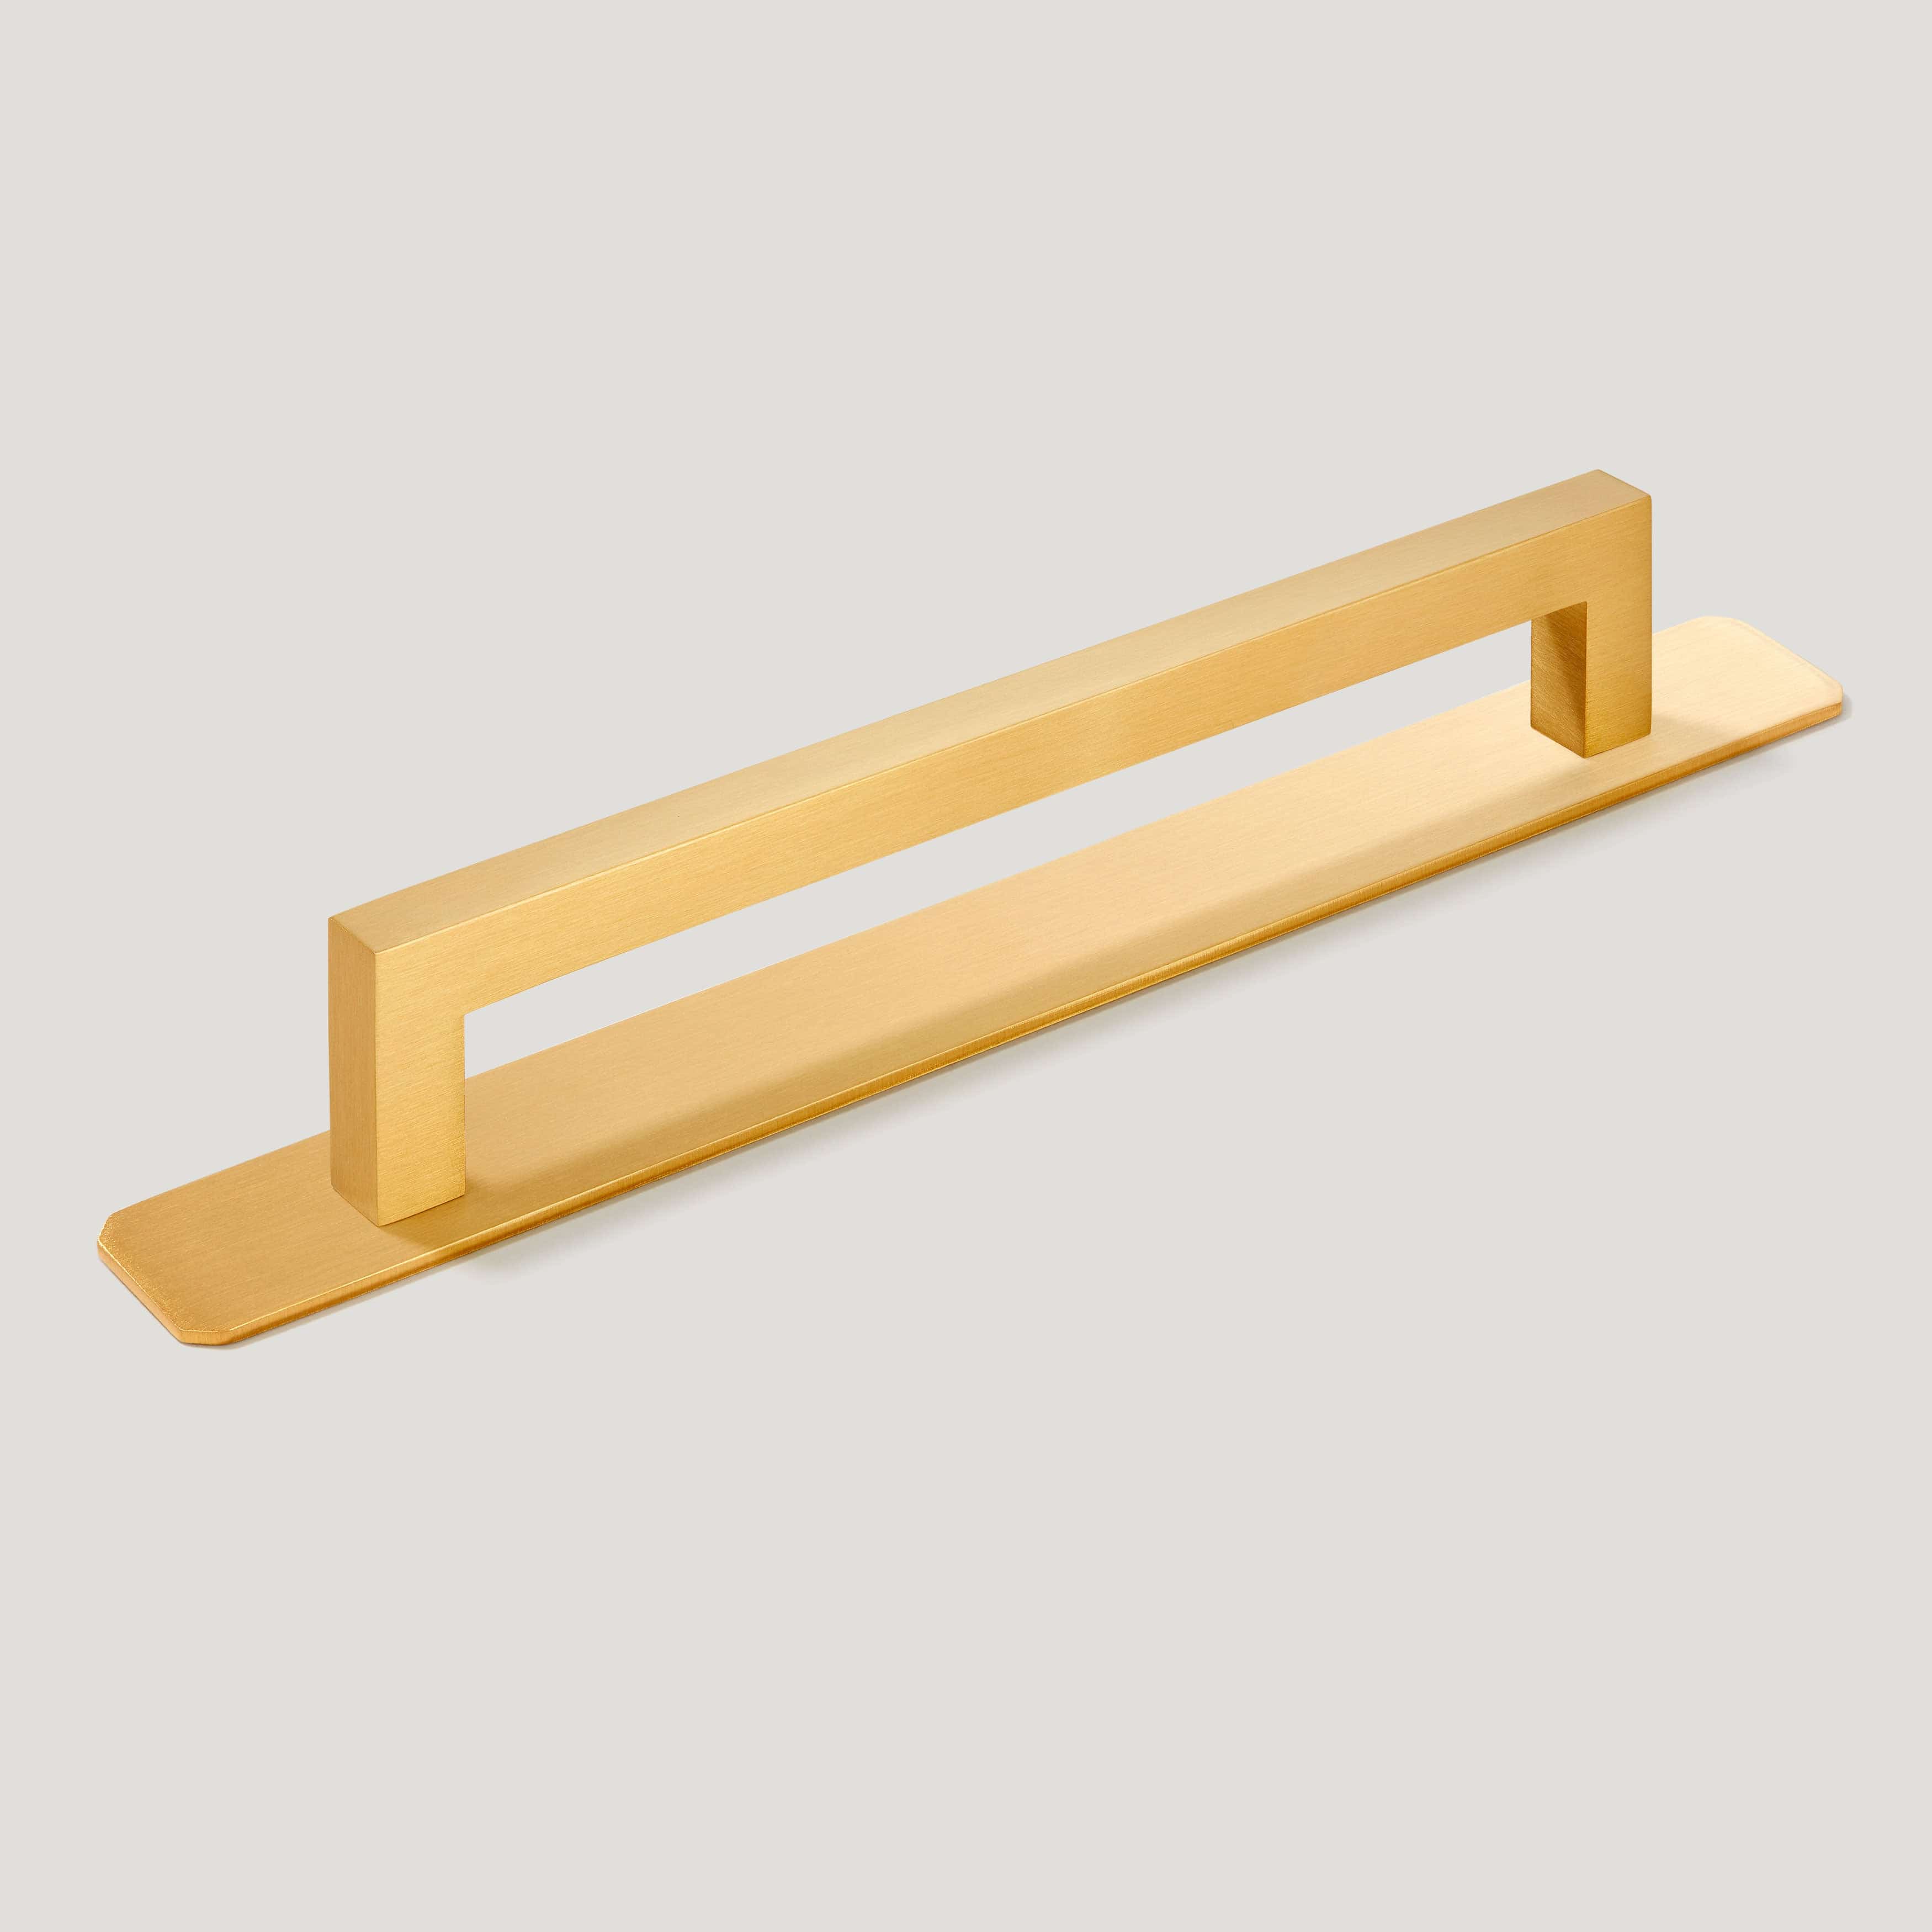 Plank Hardware Handles & Knobs 138mm (128mm CC) / Handle with Backplate VOLTA D-Bar Slim Handle - Brass